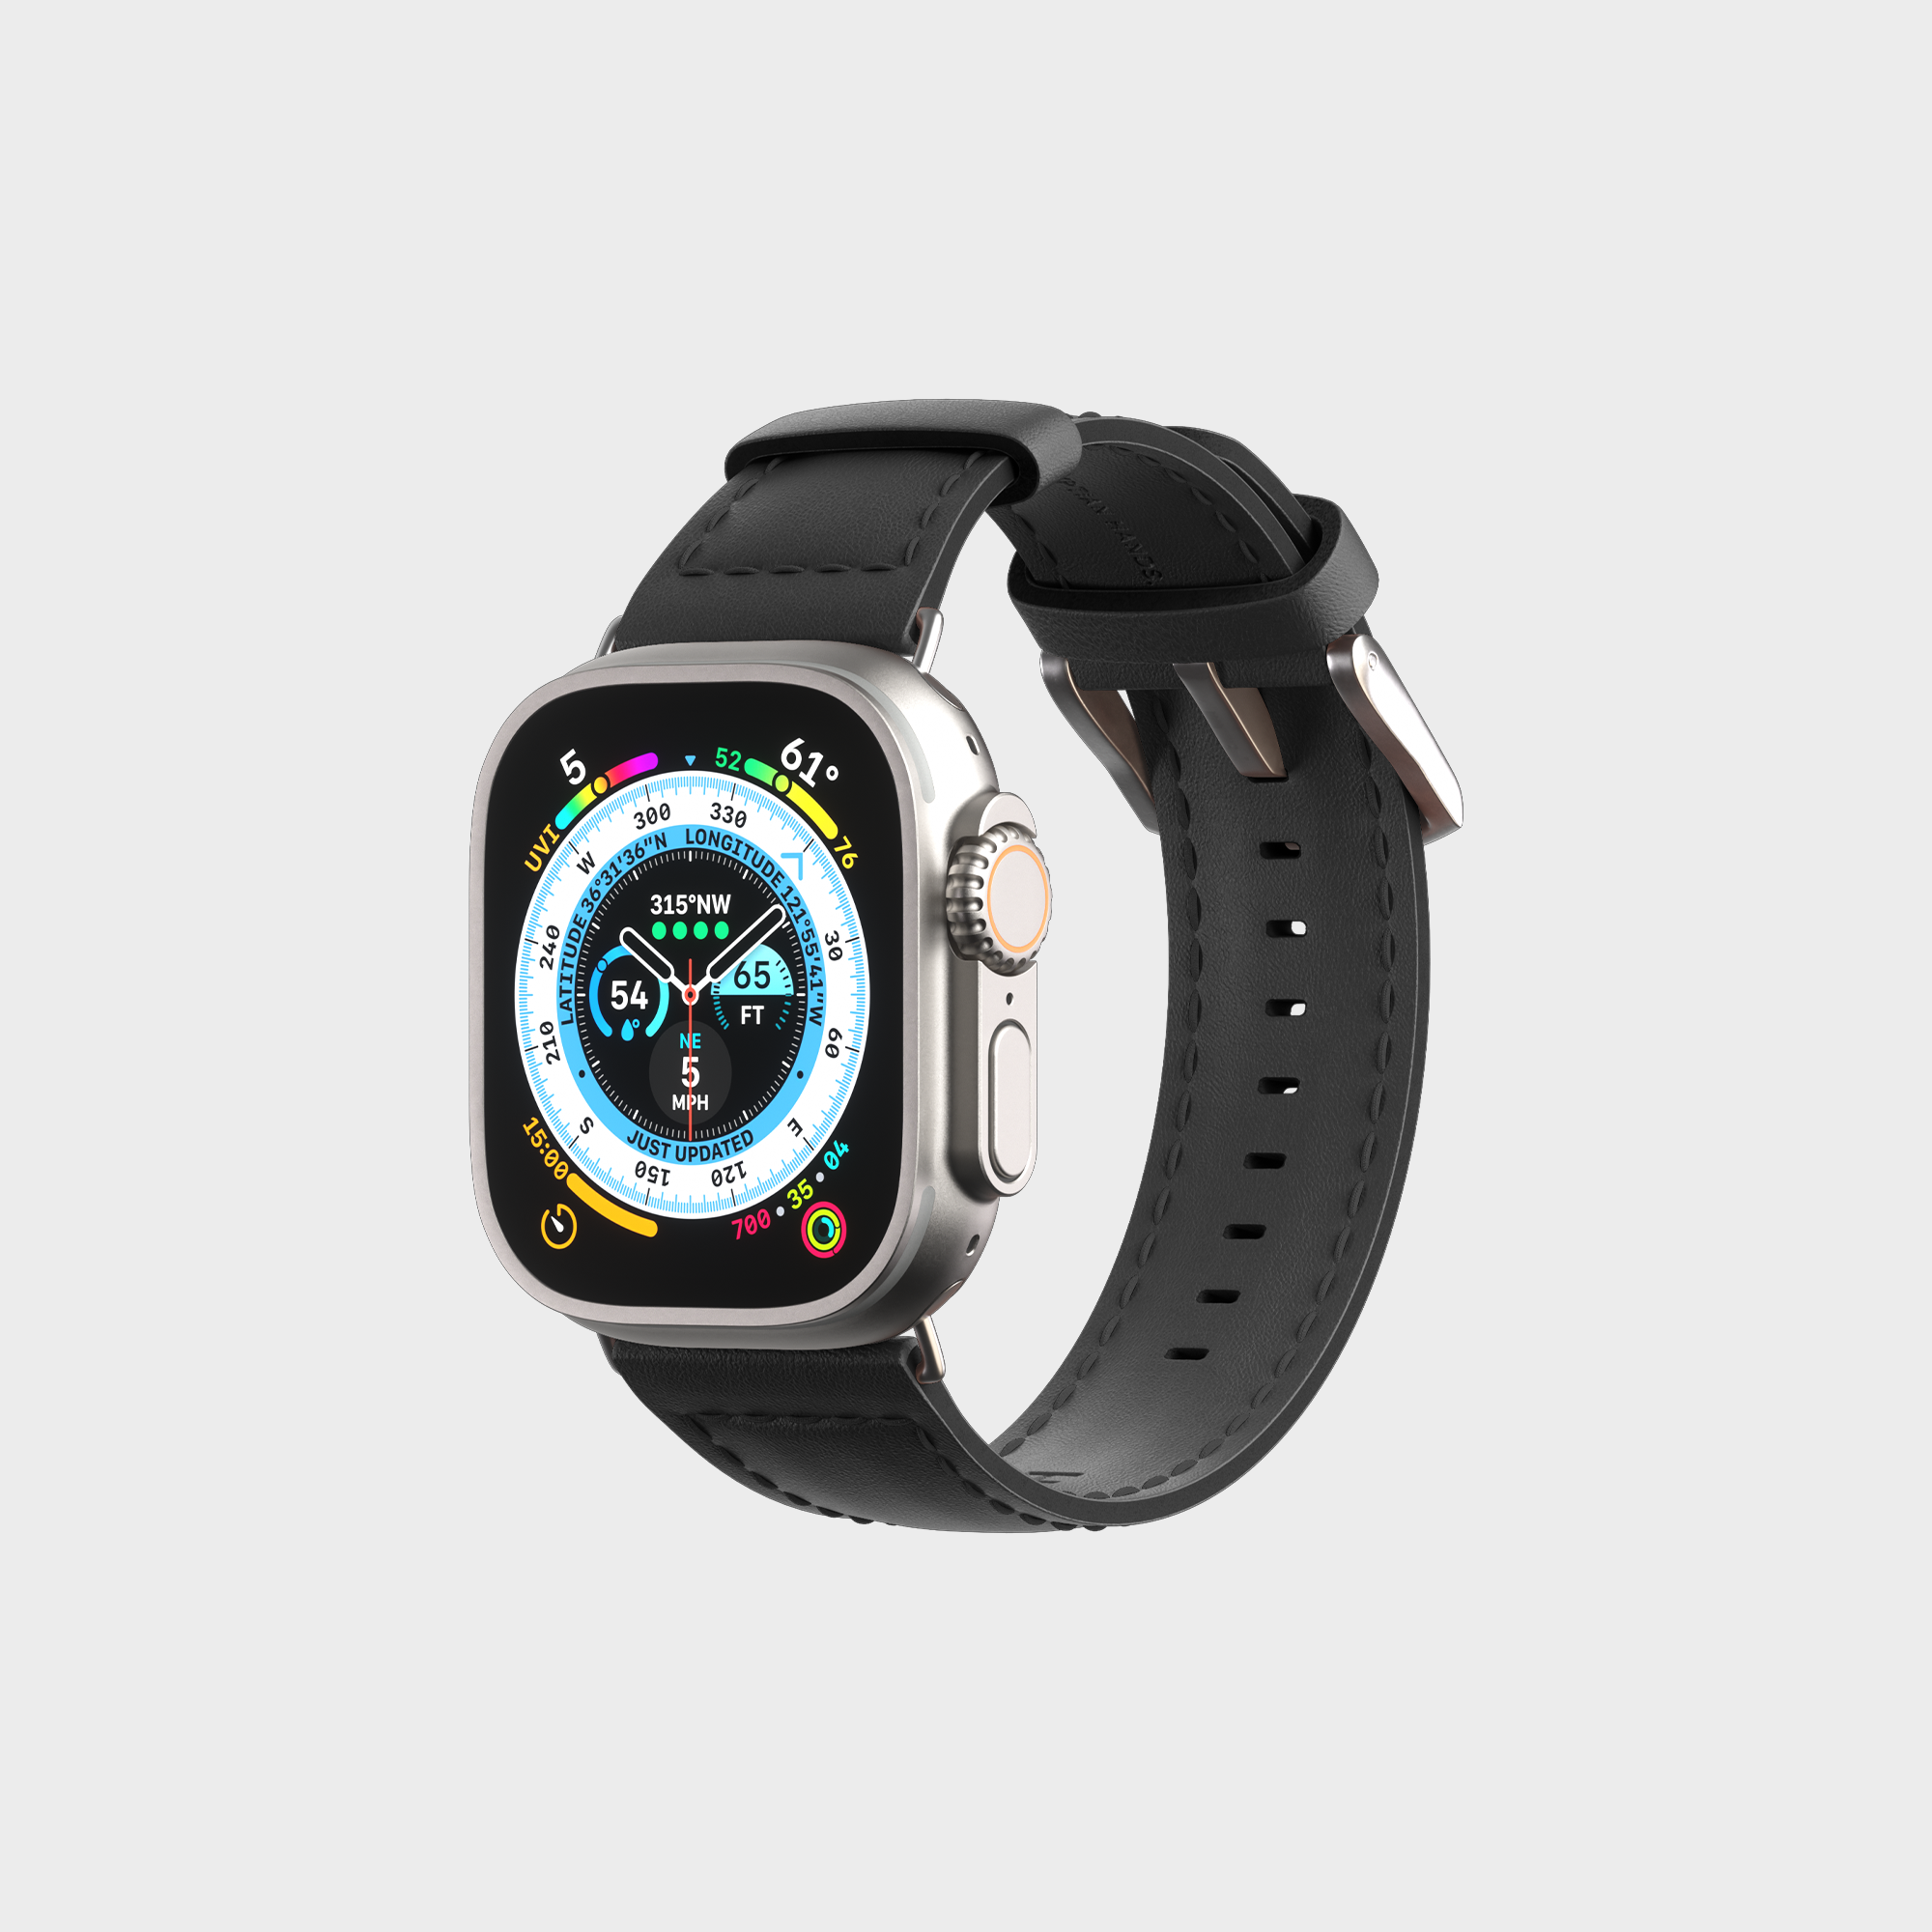 Smartwatch with fitness tracker interface on a black strap isolated on white background.